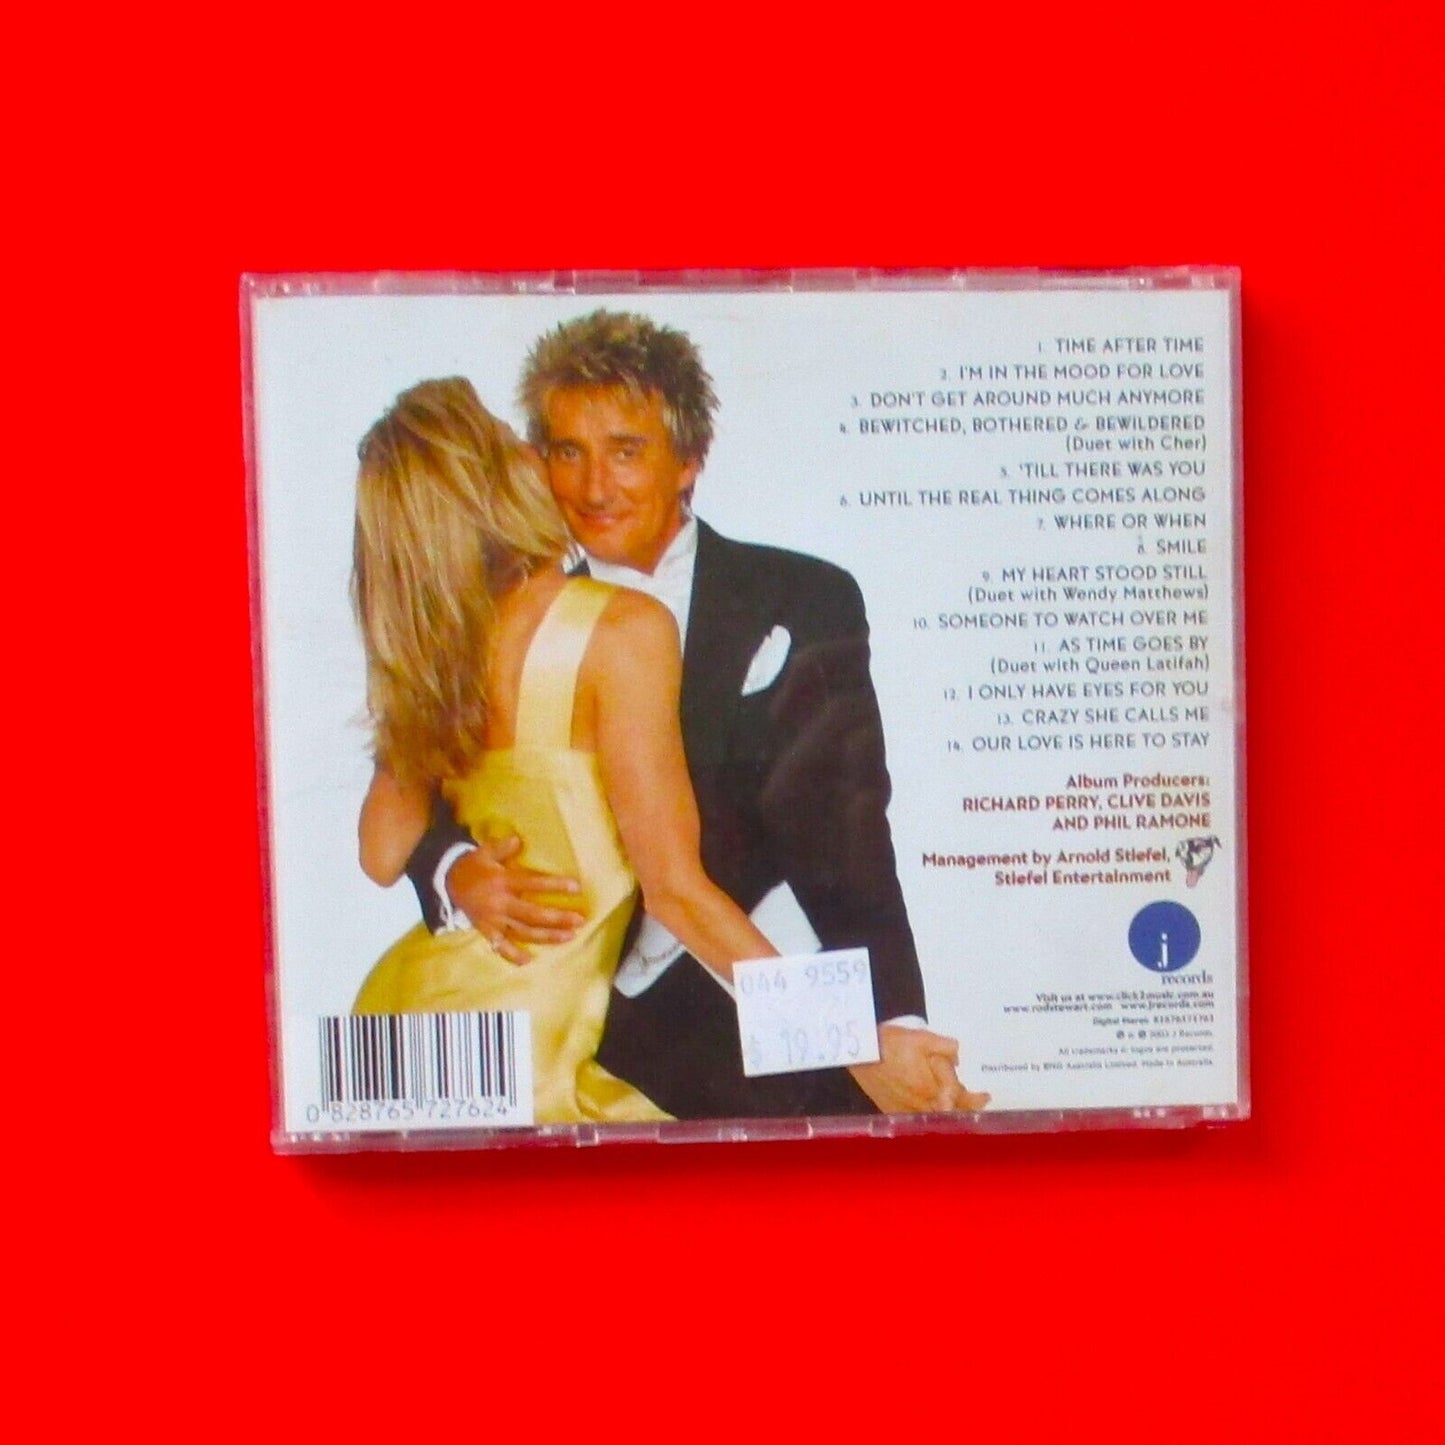 Rod Stewart ‎As Time Goes By... The Great American Songbook Vol. II 2003 CD